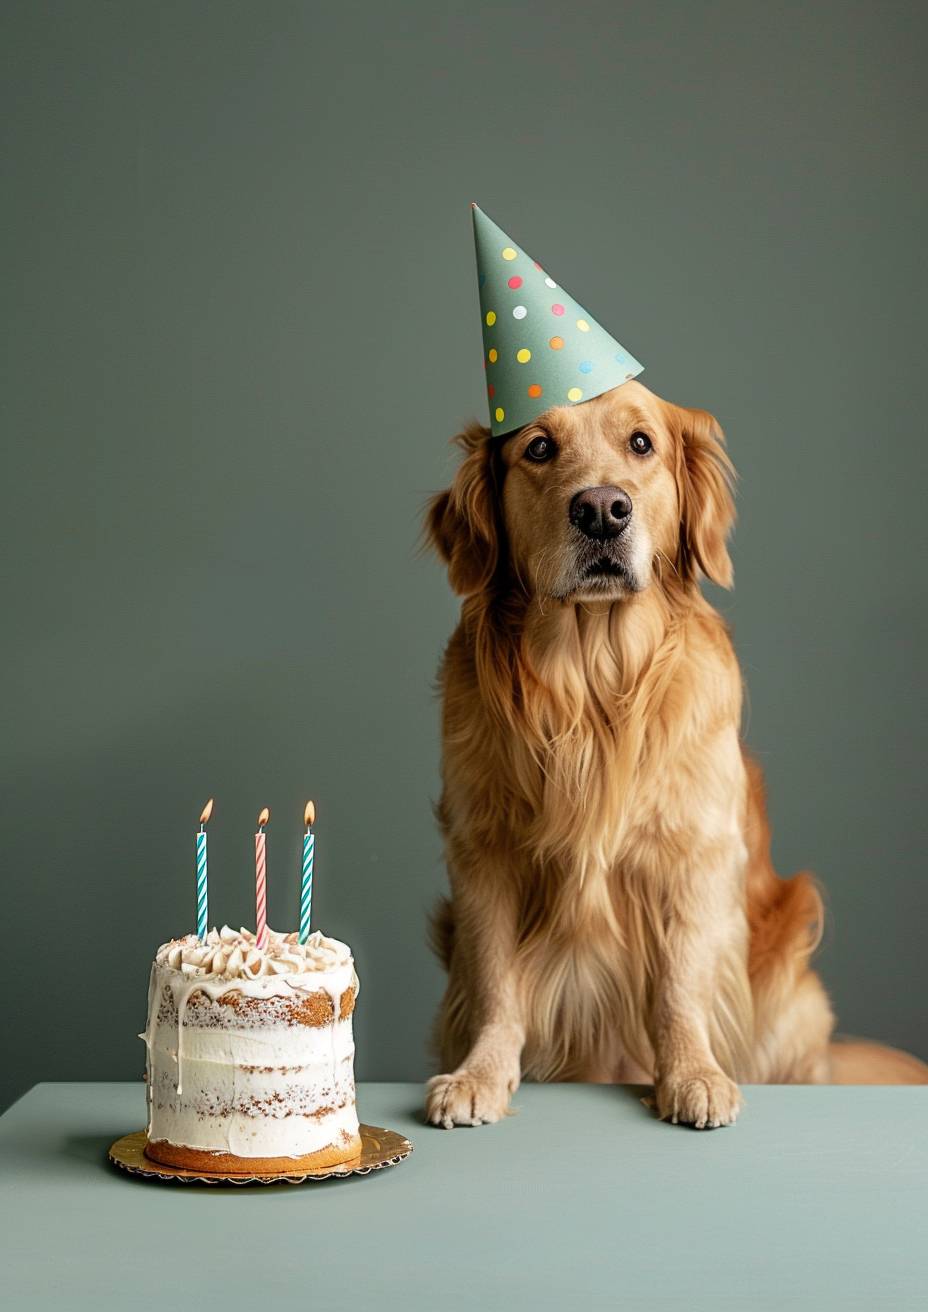 A dog with a party hat on its head sat next to a birthday cake, in a green background, simple and minimalistic design by rifle paper co.